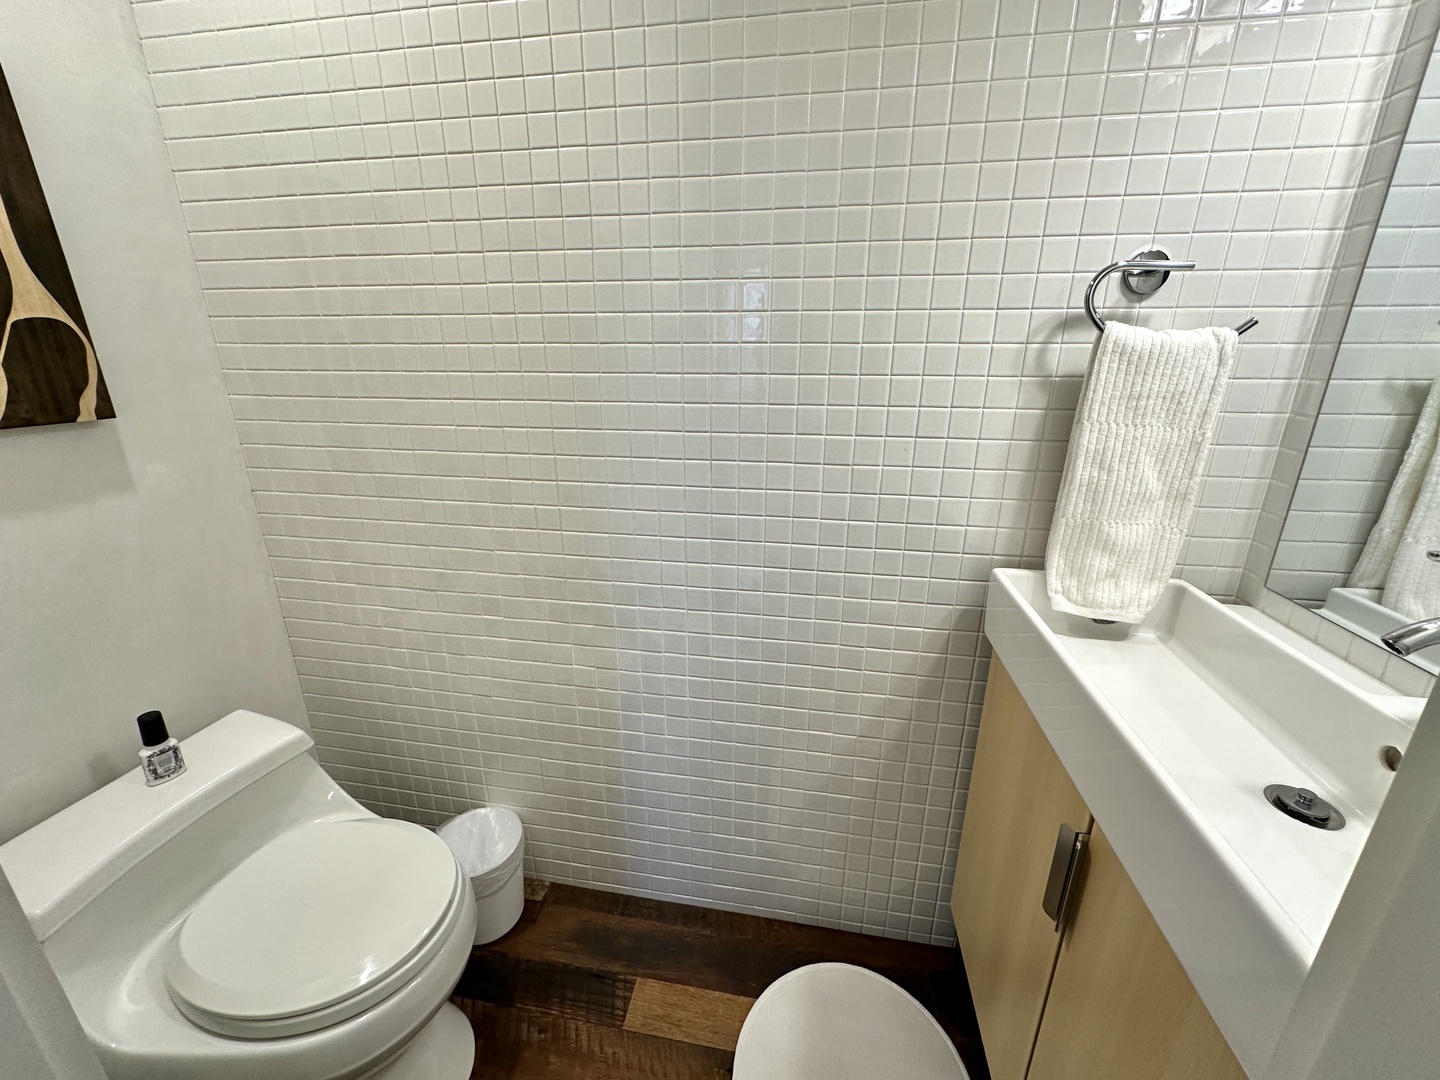 A convenient powder room is tucked away on the 2nd floor